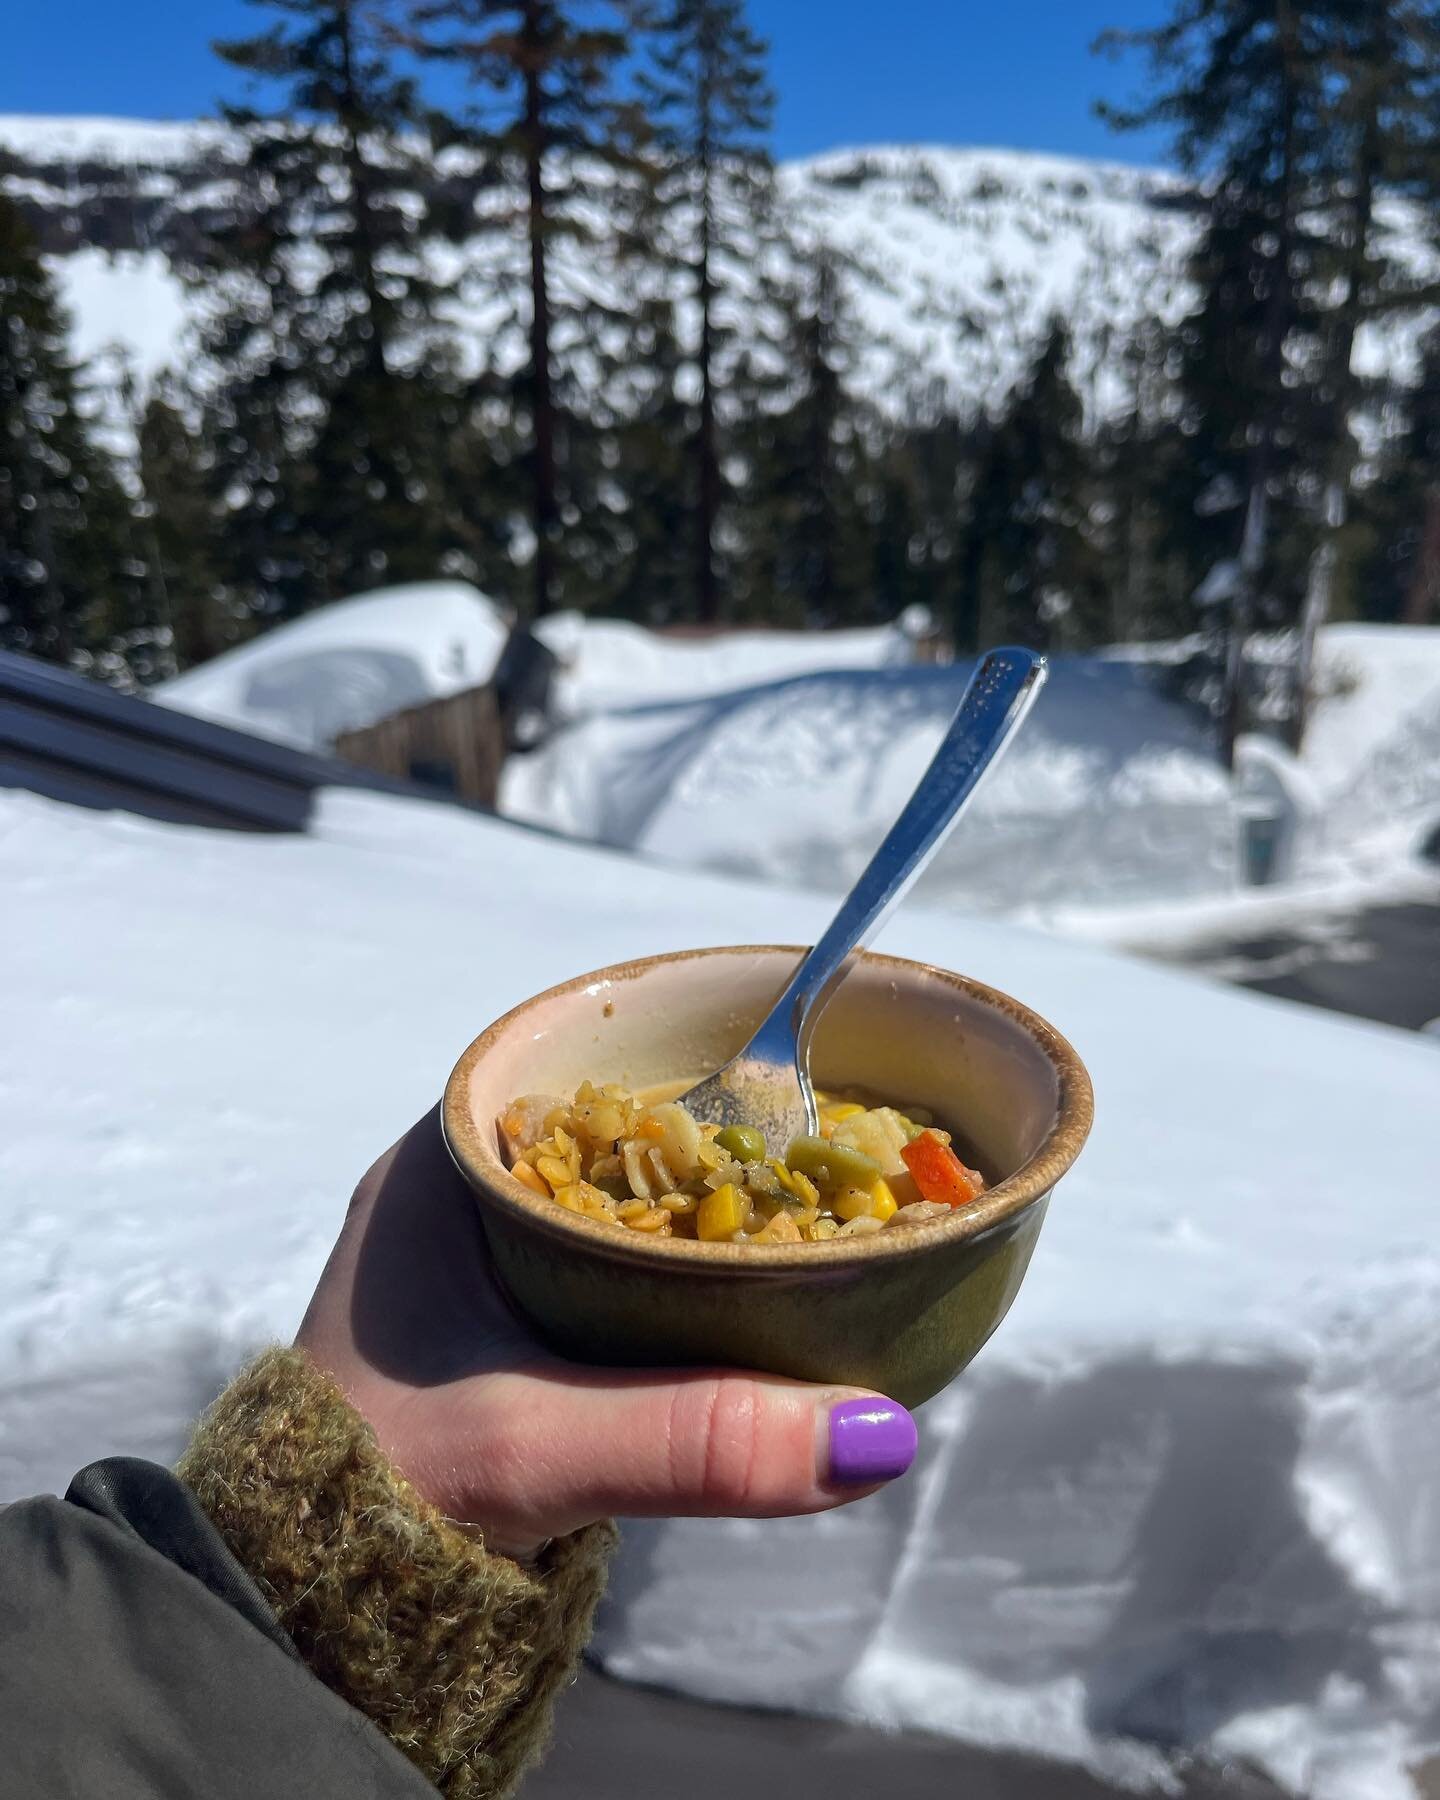 It's the people I tell you! With a loooooong and cold meeting up in kirkwood yesterday, it was only fitting that our contractor brought homemade chicken soup and our client provided lunch. It was such a special and comforting moment that reinforced h